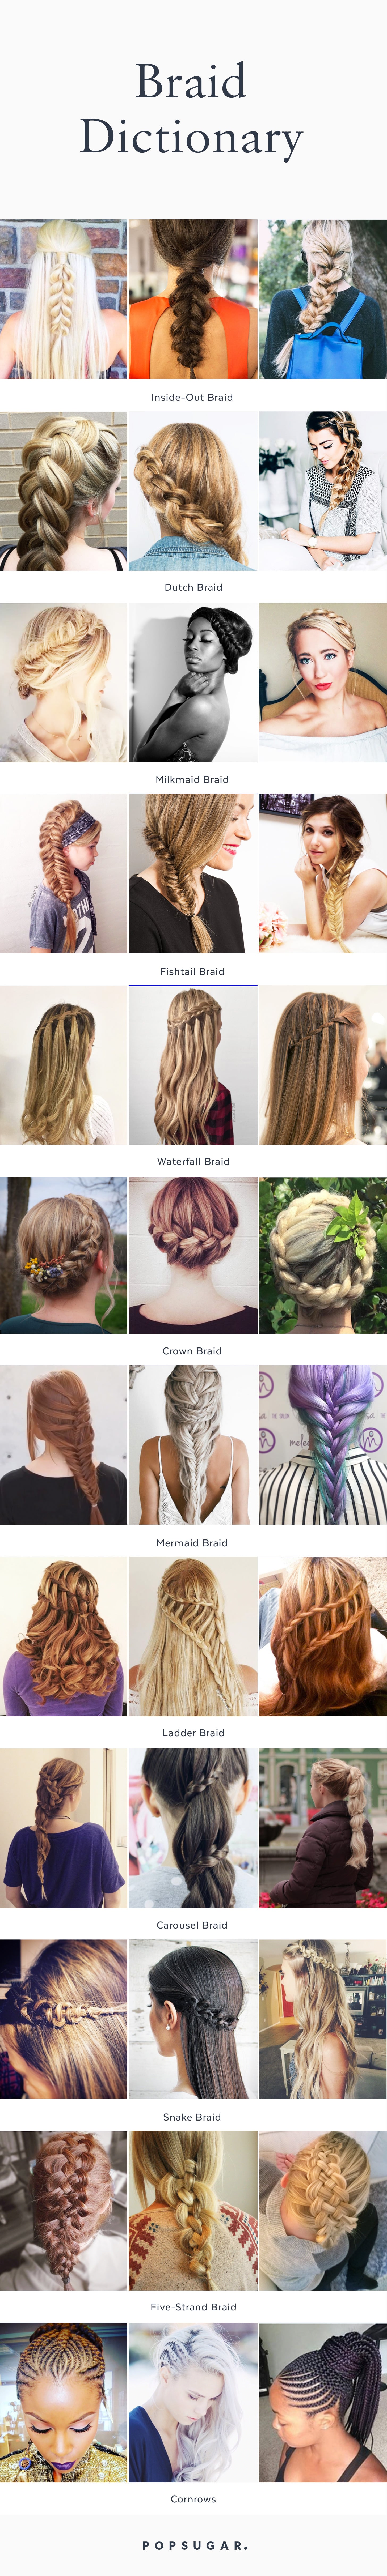 Pin It! | A Comprehensive Guide to Every Gorgeous Braid From Pinterest |  POPSUGAR Beauty Photo 51